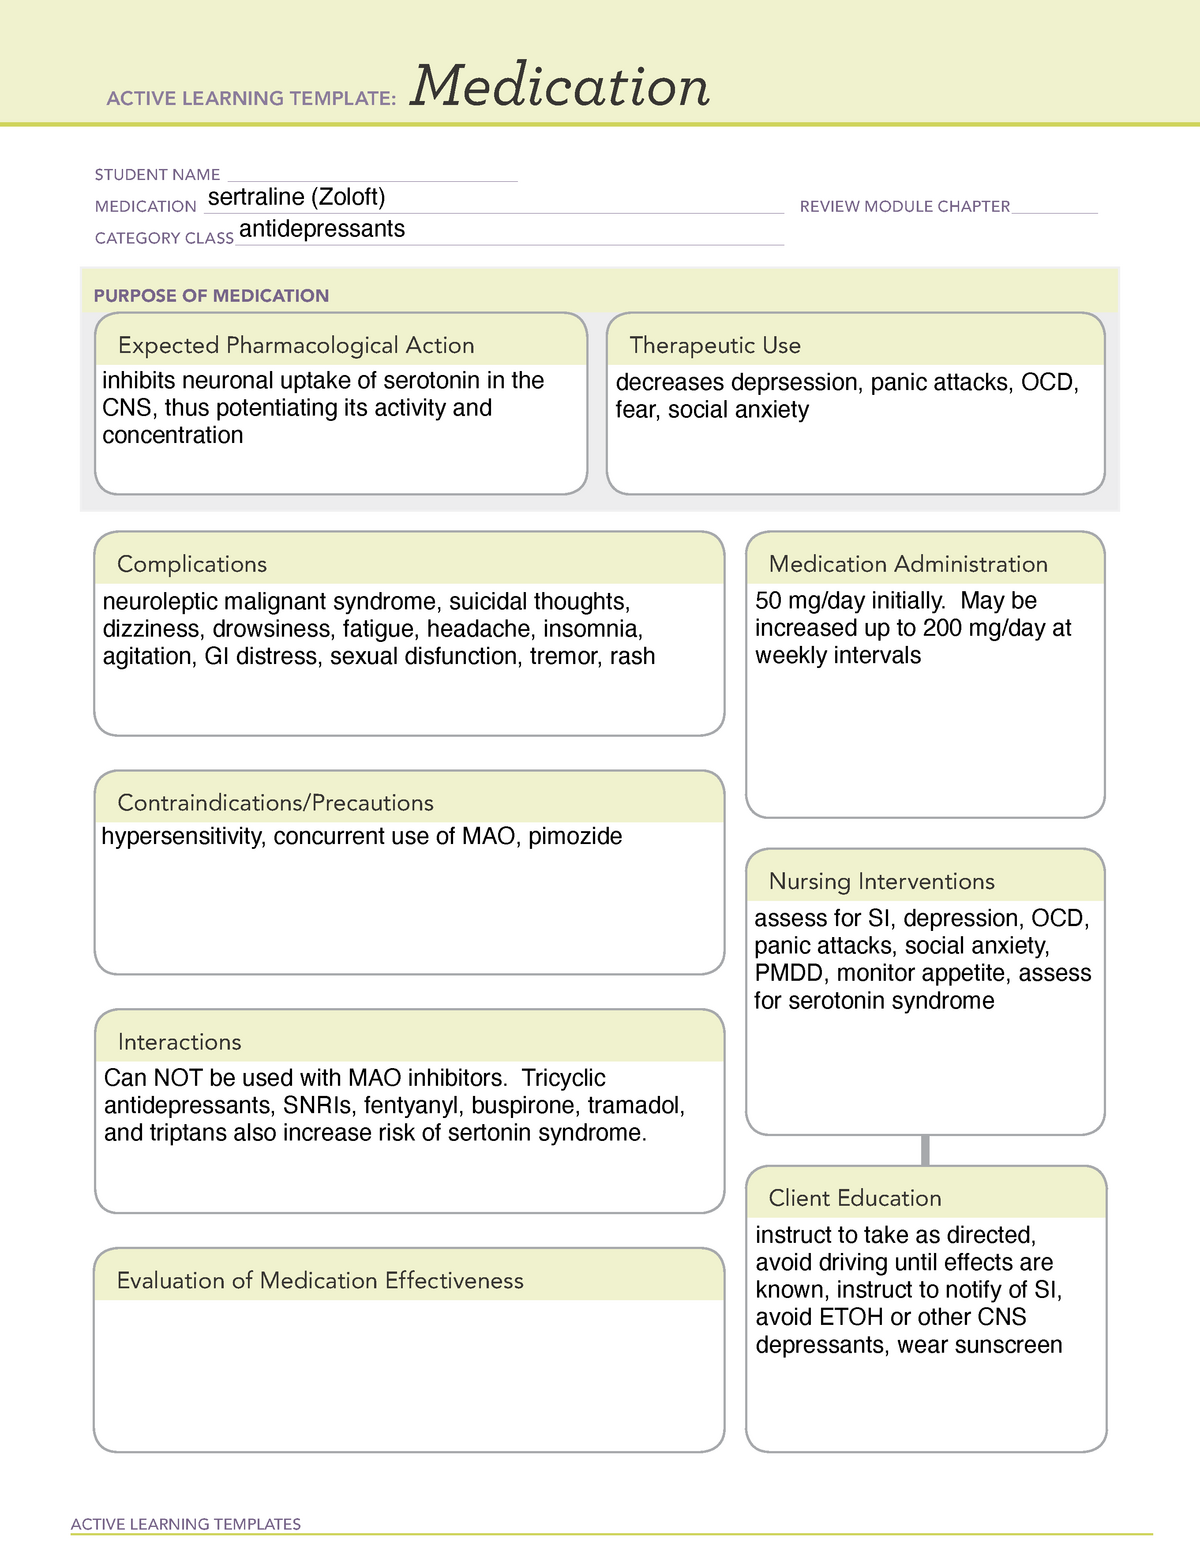 Setraline ATI medication template ACTIVE LEARNING TEMPLATES